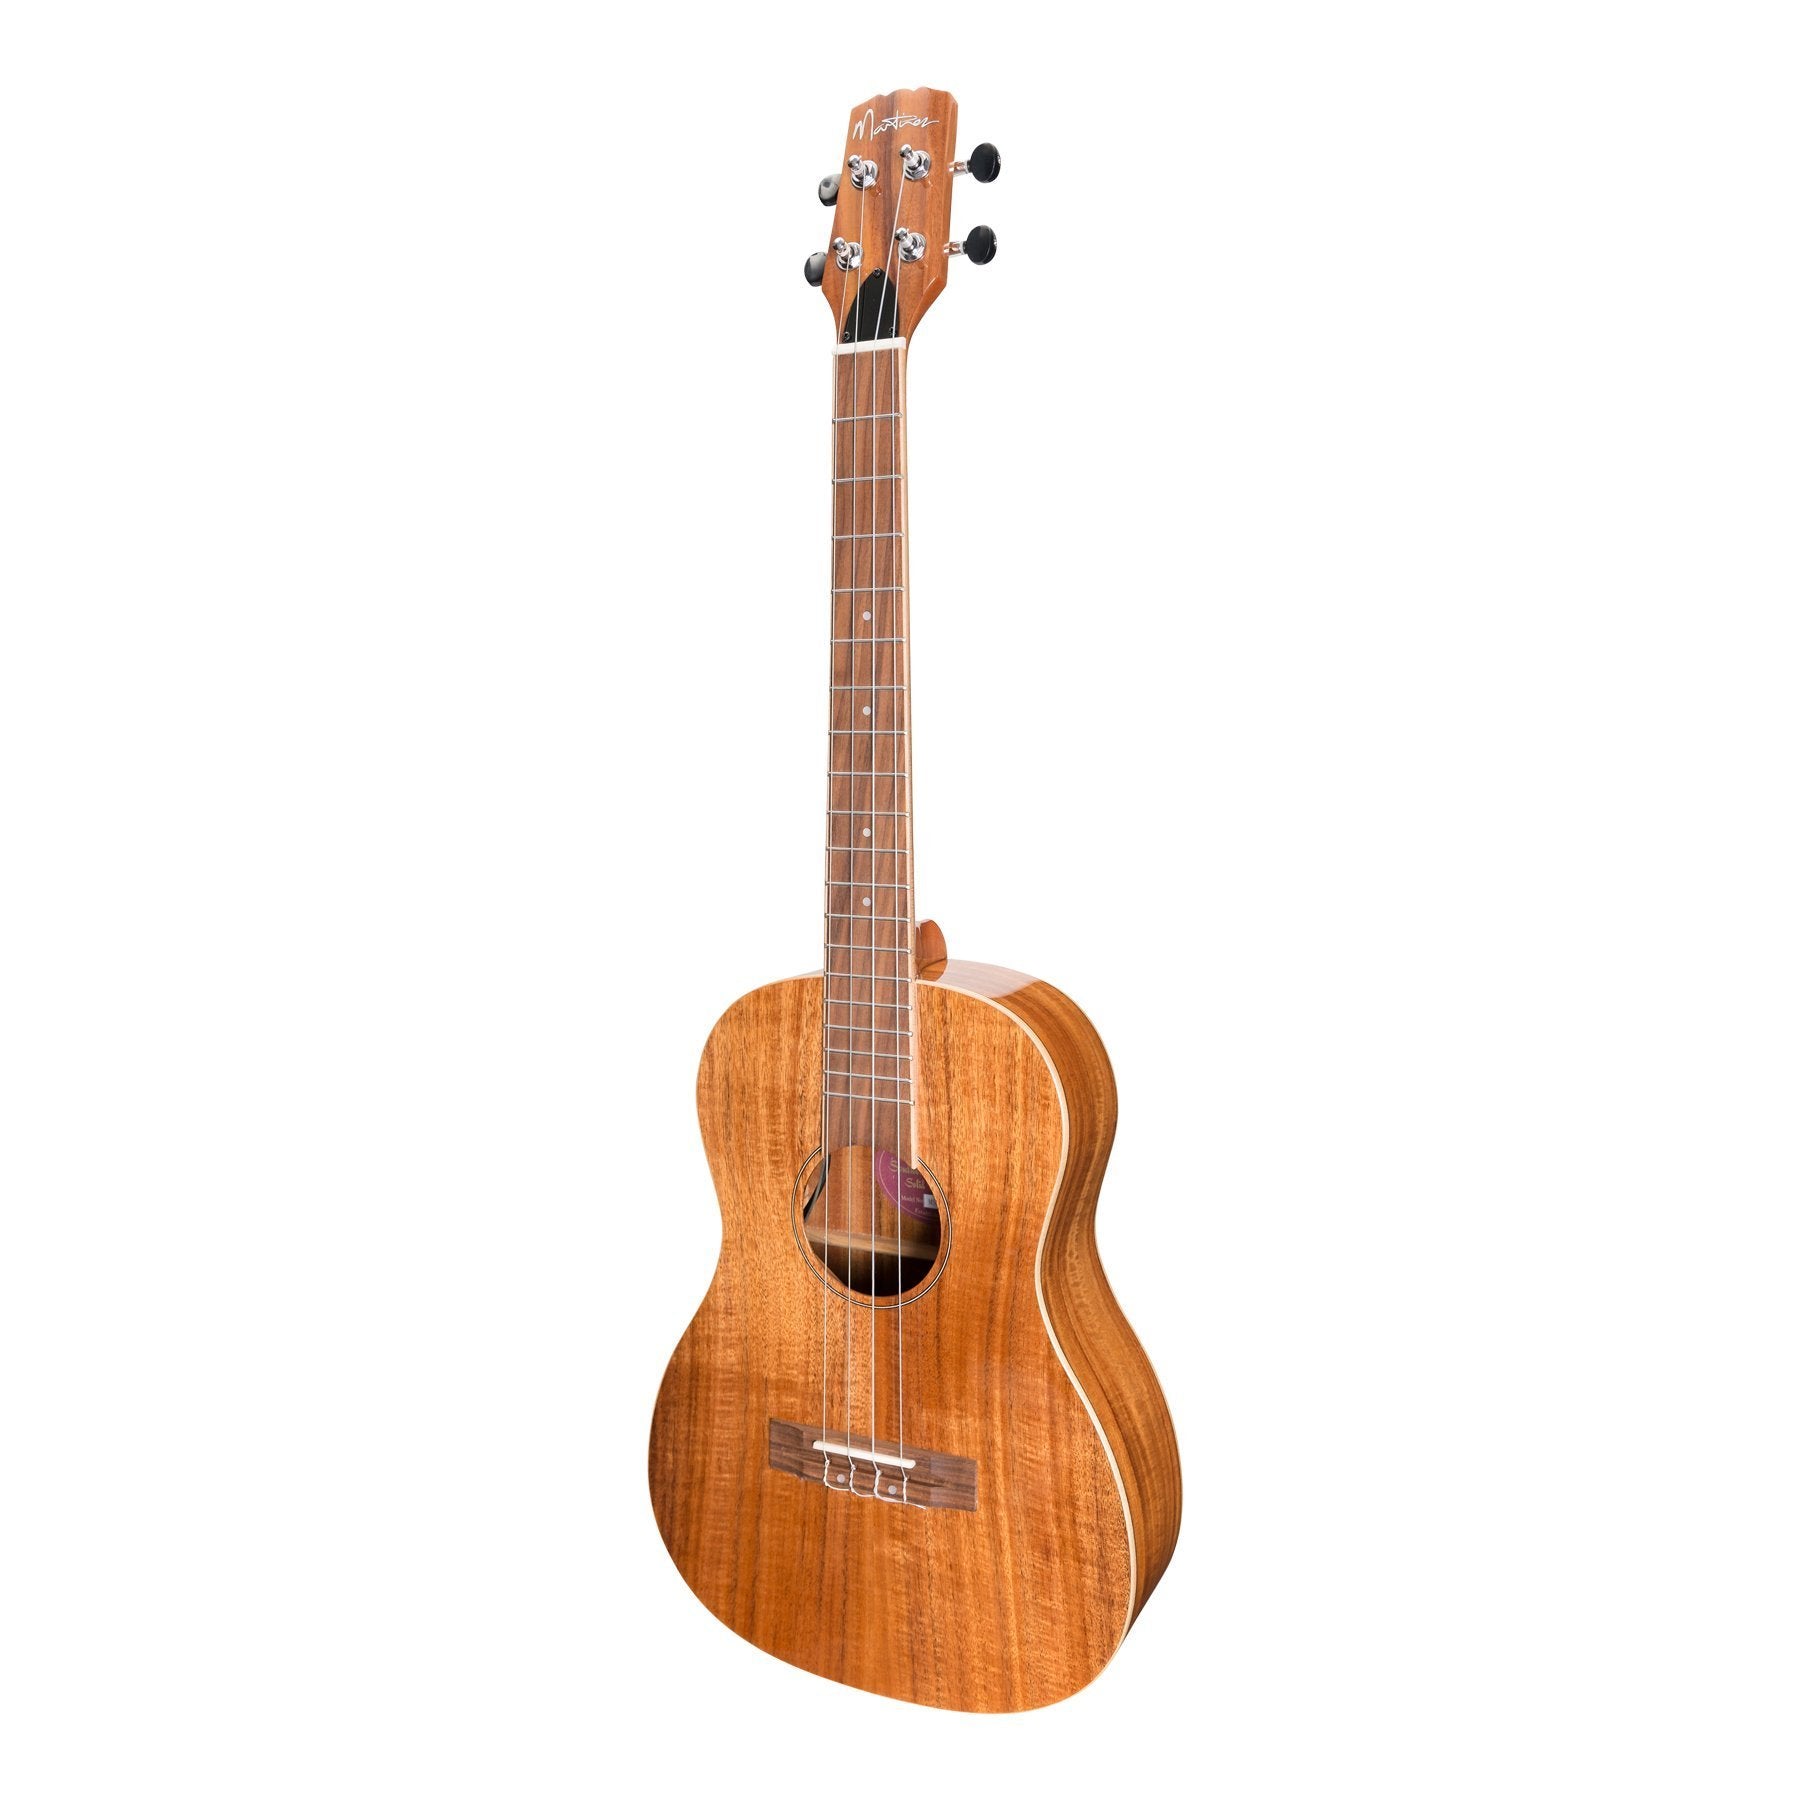 Martinez 'Southern Belle 8 Series' Koa Solid Top Electric Baritone Ukulele with Hard Case (Natural Gloss)-MSBB-8-NGL